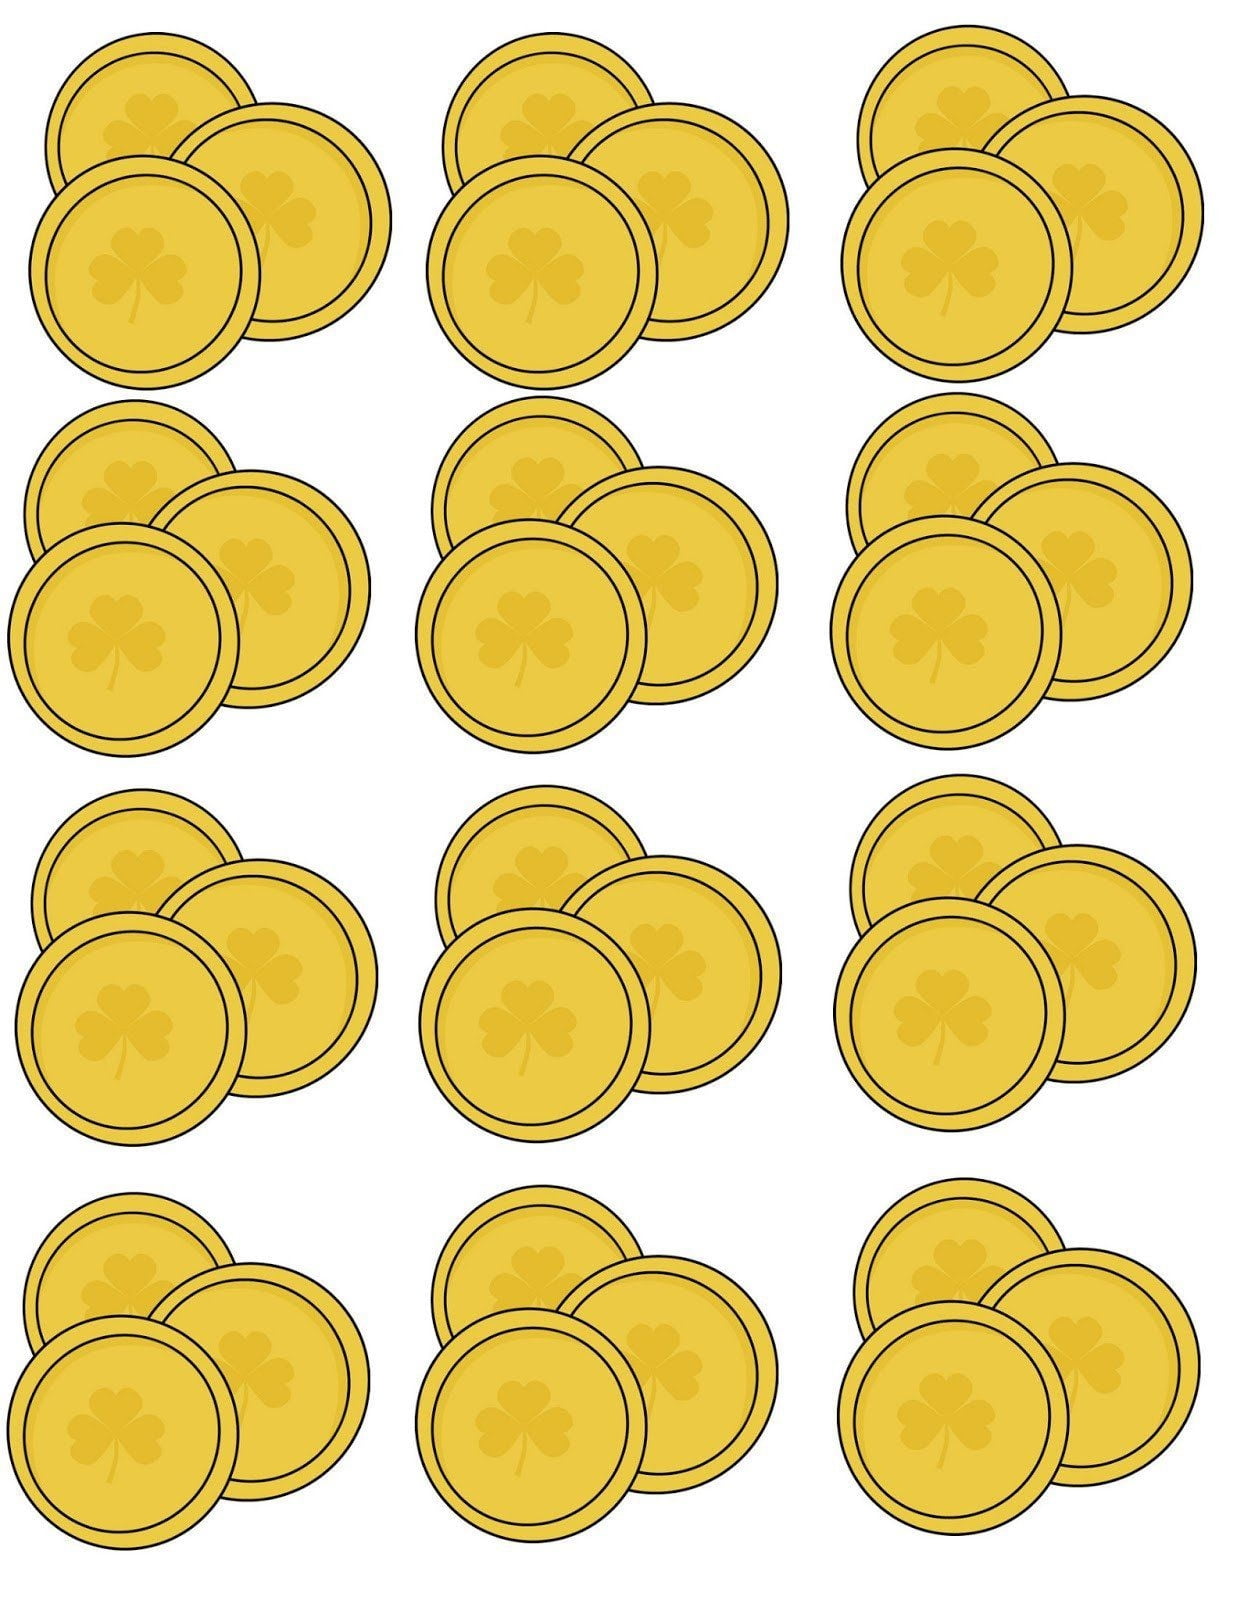 Gold Coin Template Printable St Patrick S Day Rainbow Craft Activity 3 Day Fr St Patrick s Day Crafts St Patrick Day Activities St Patricks Day Crafts For Kids